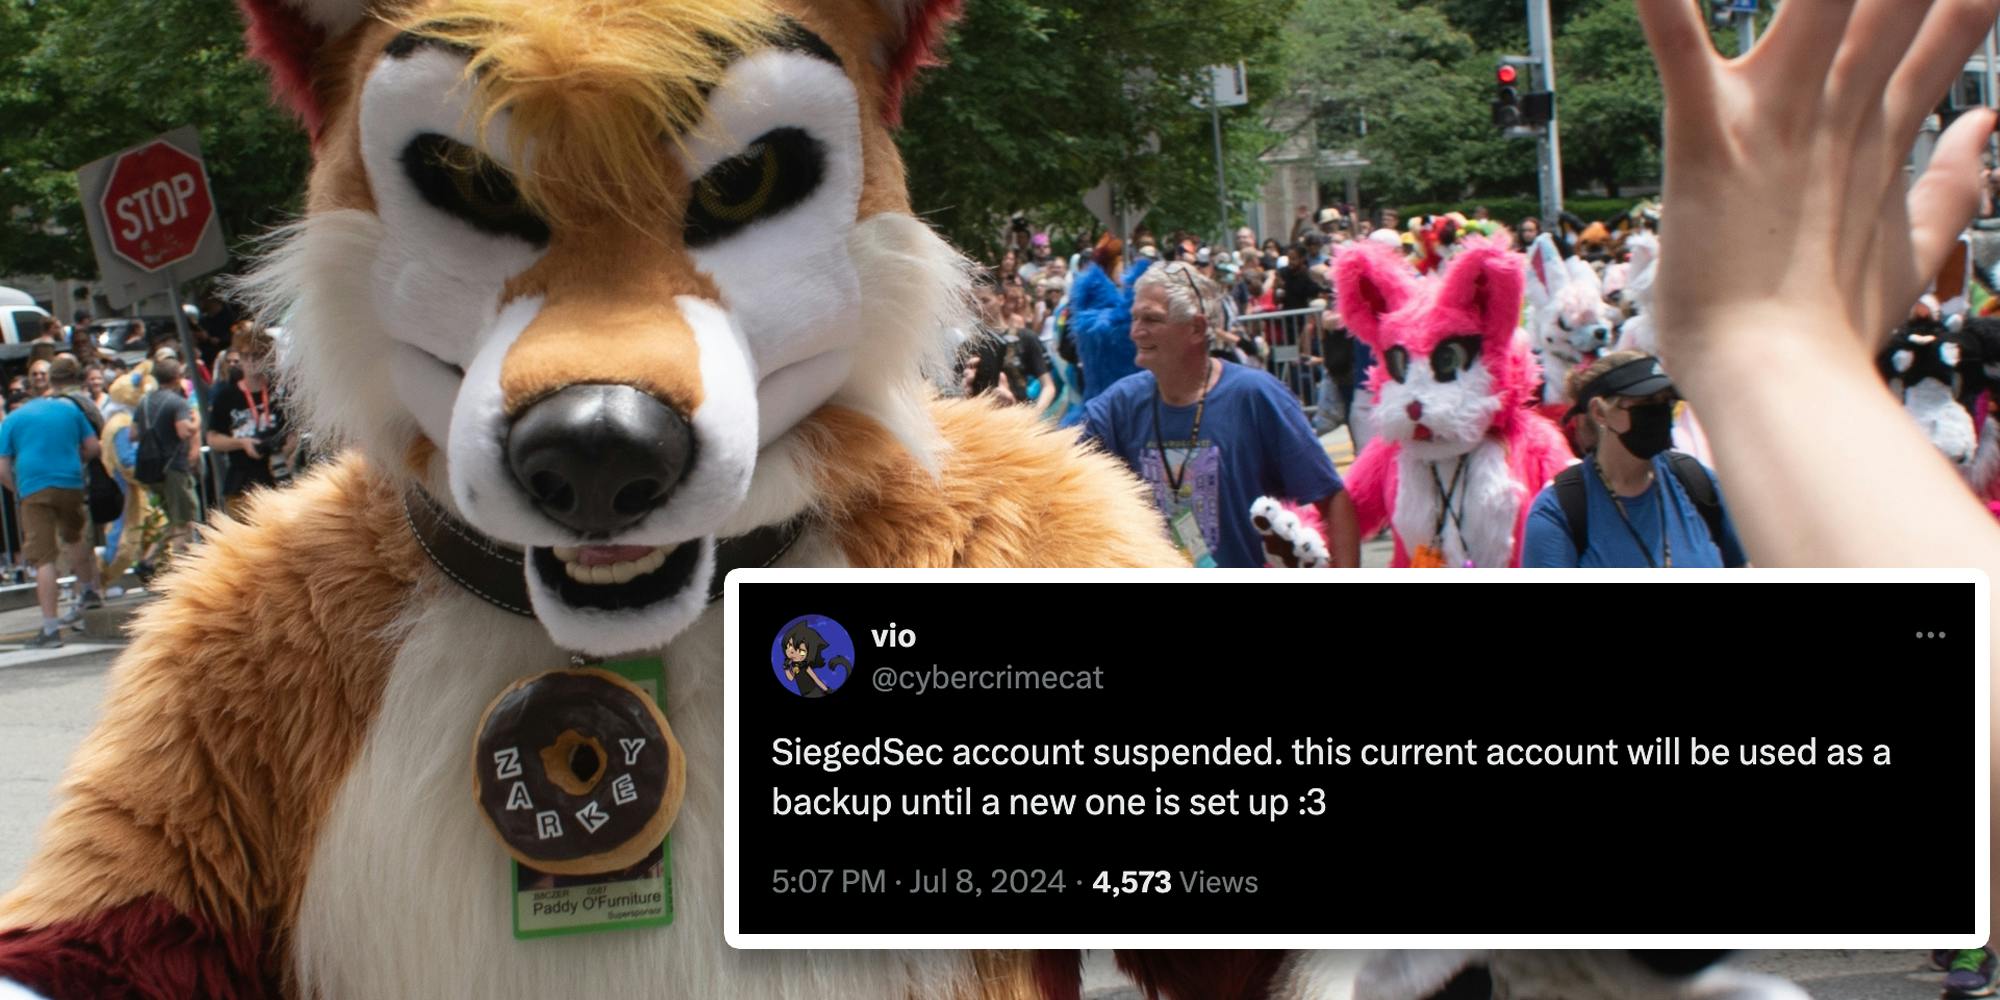 Furries at parade with tweet over it about siegedsec account being suspended